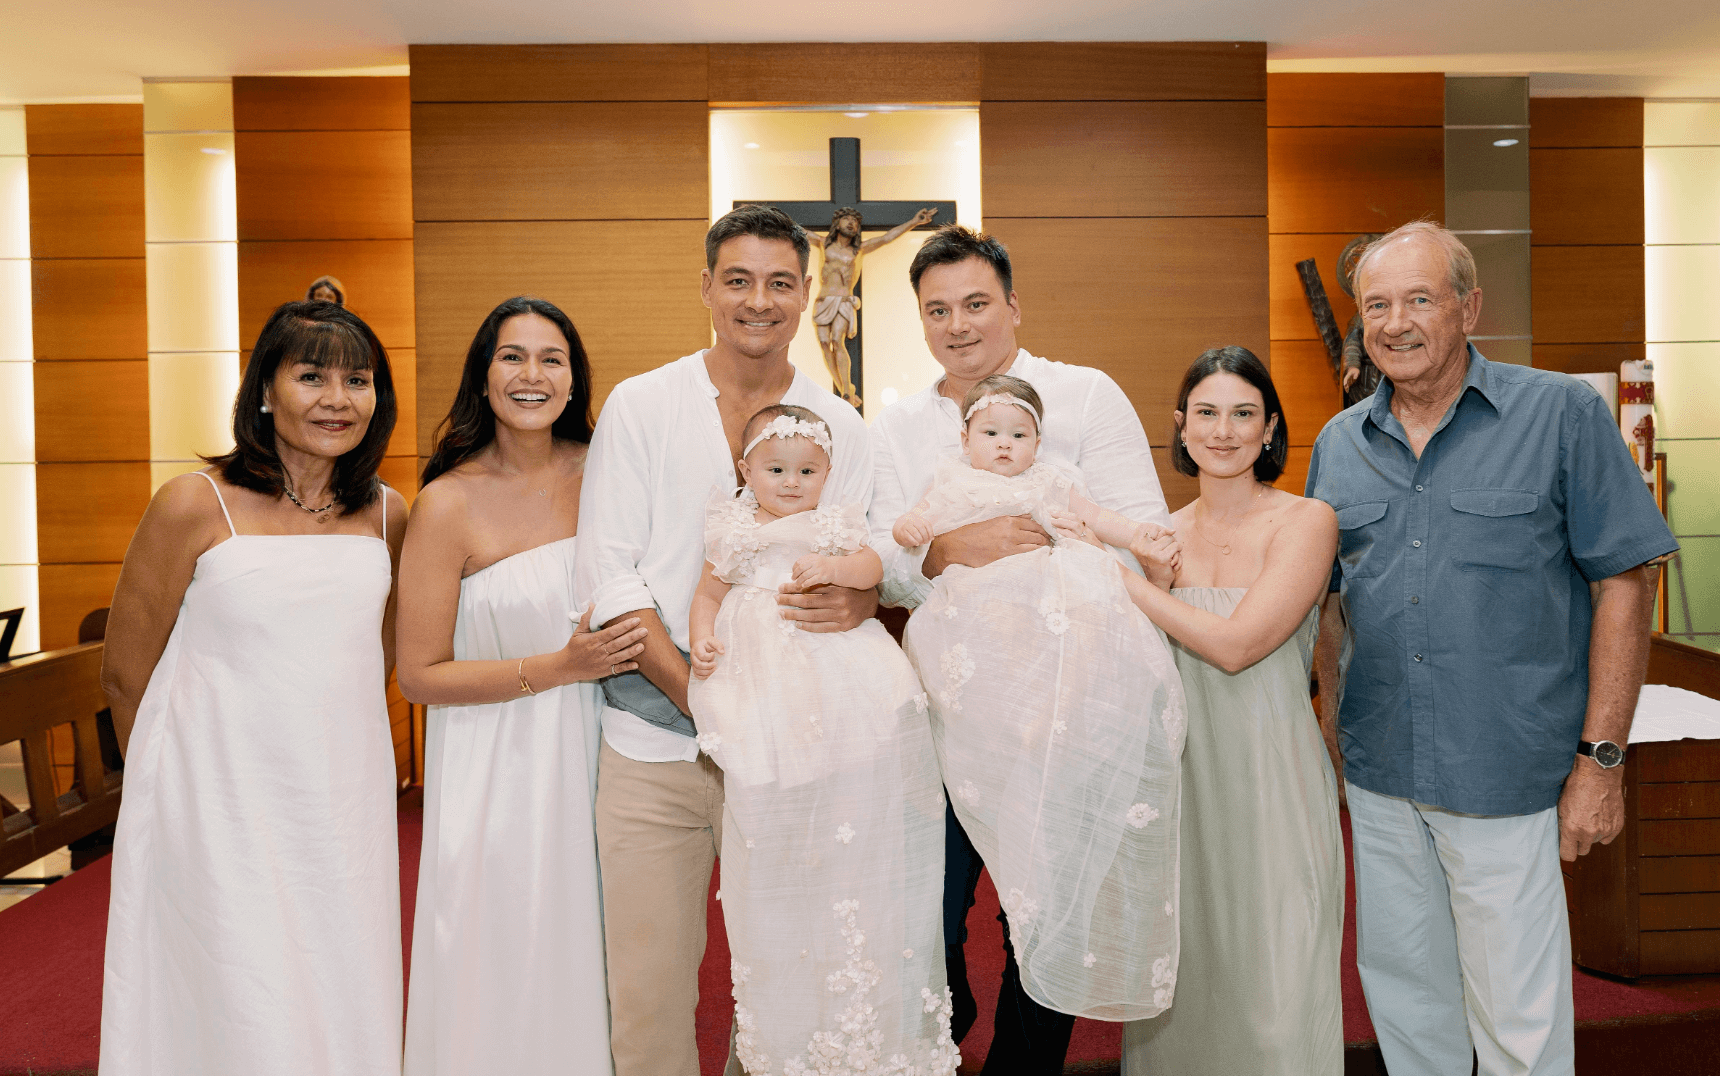 With Deia and Sadie born only weeks apart in January and March 2023, their shared baptism marked a spiritual milestone. It also solidified the bond between families and friends. 